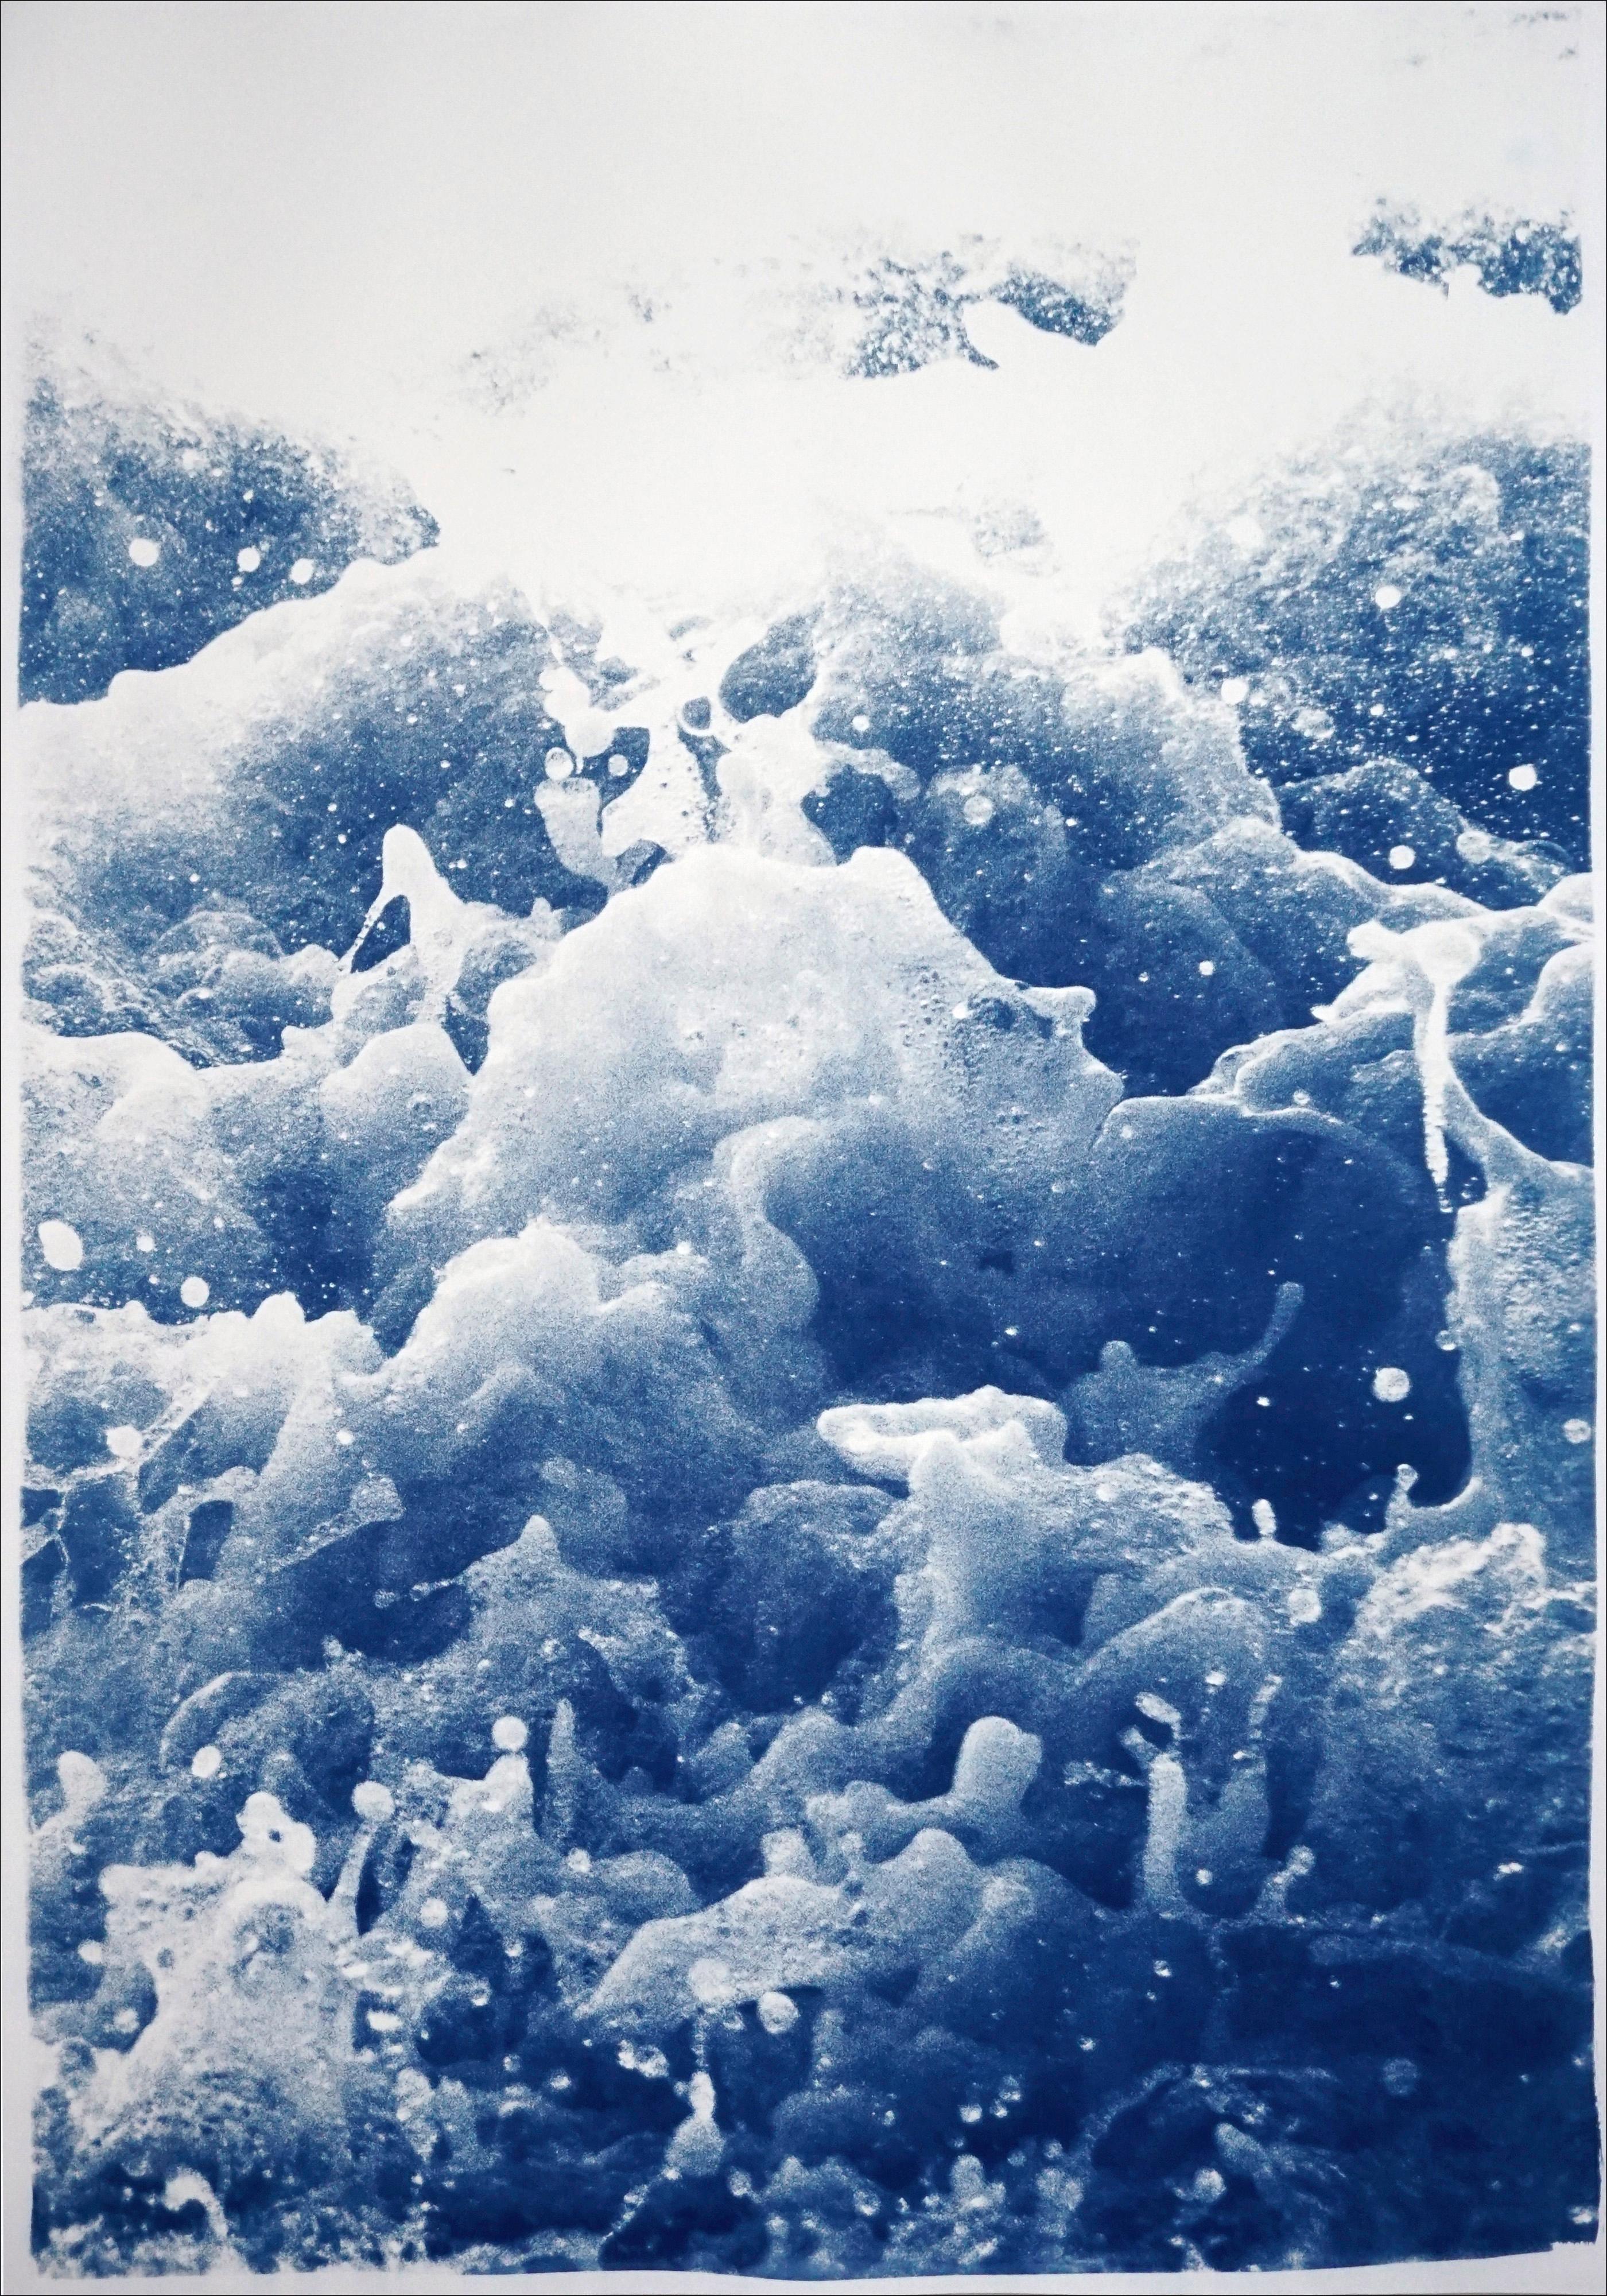 This is an exclusive handprinted limited edition cyanotype.

